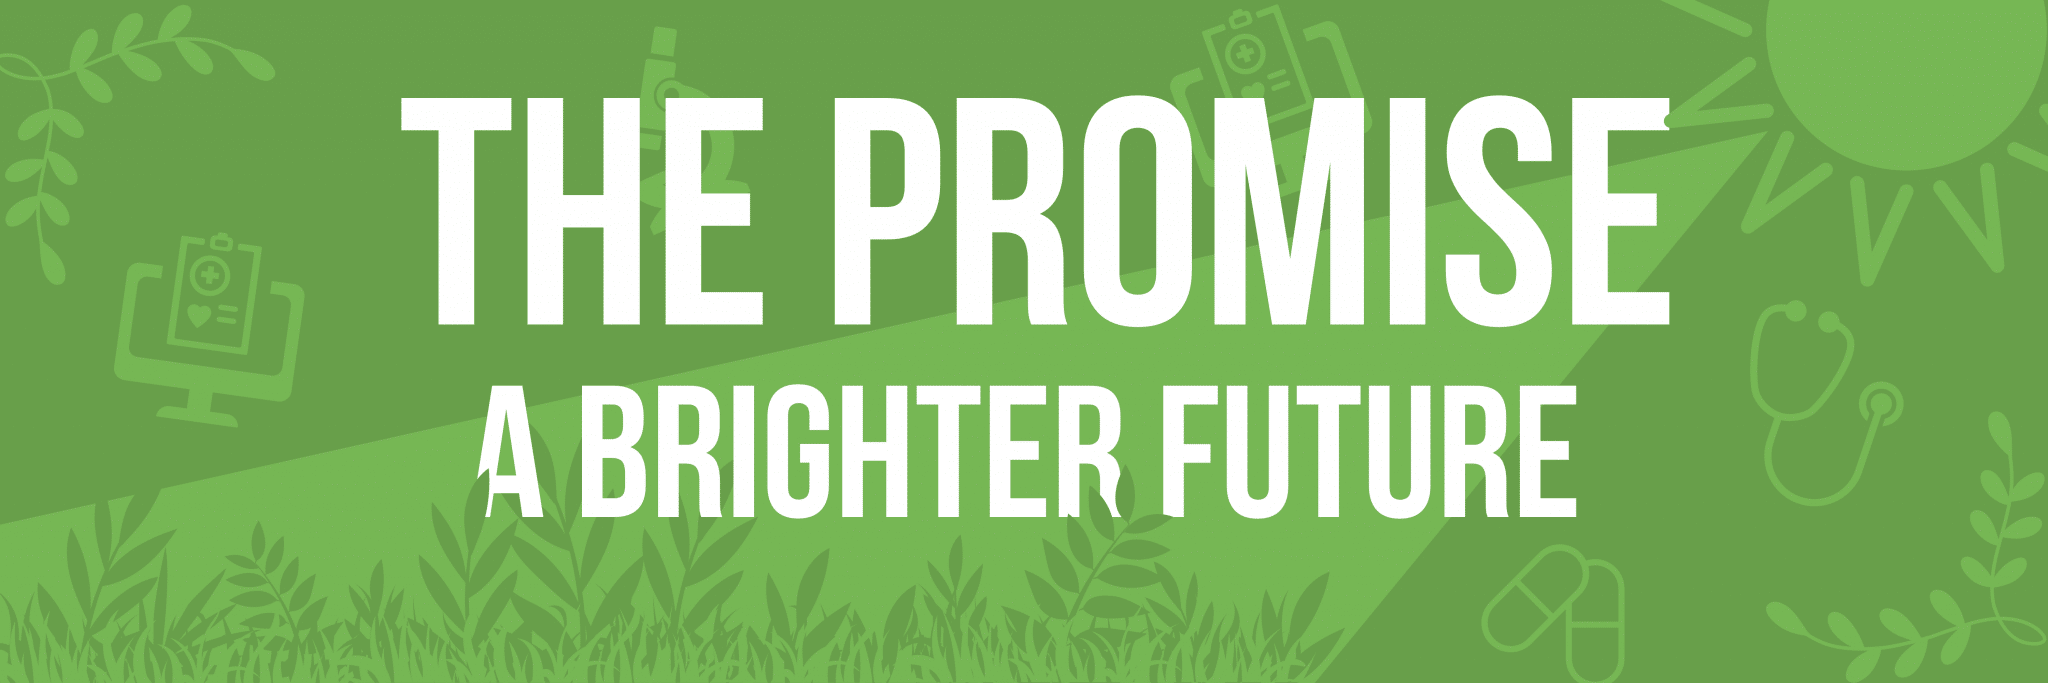 THE PROMISE: A BRIGHTER FUTURE